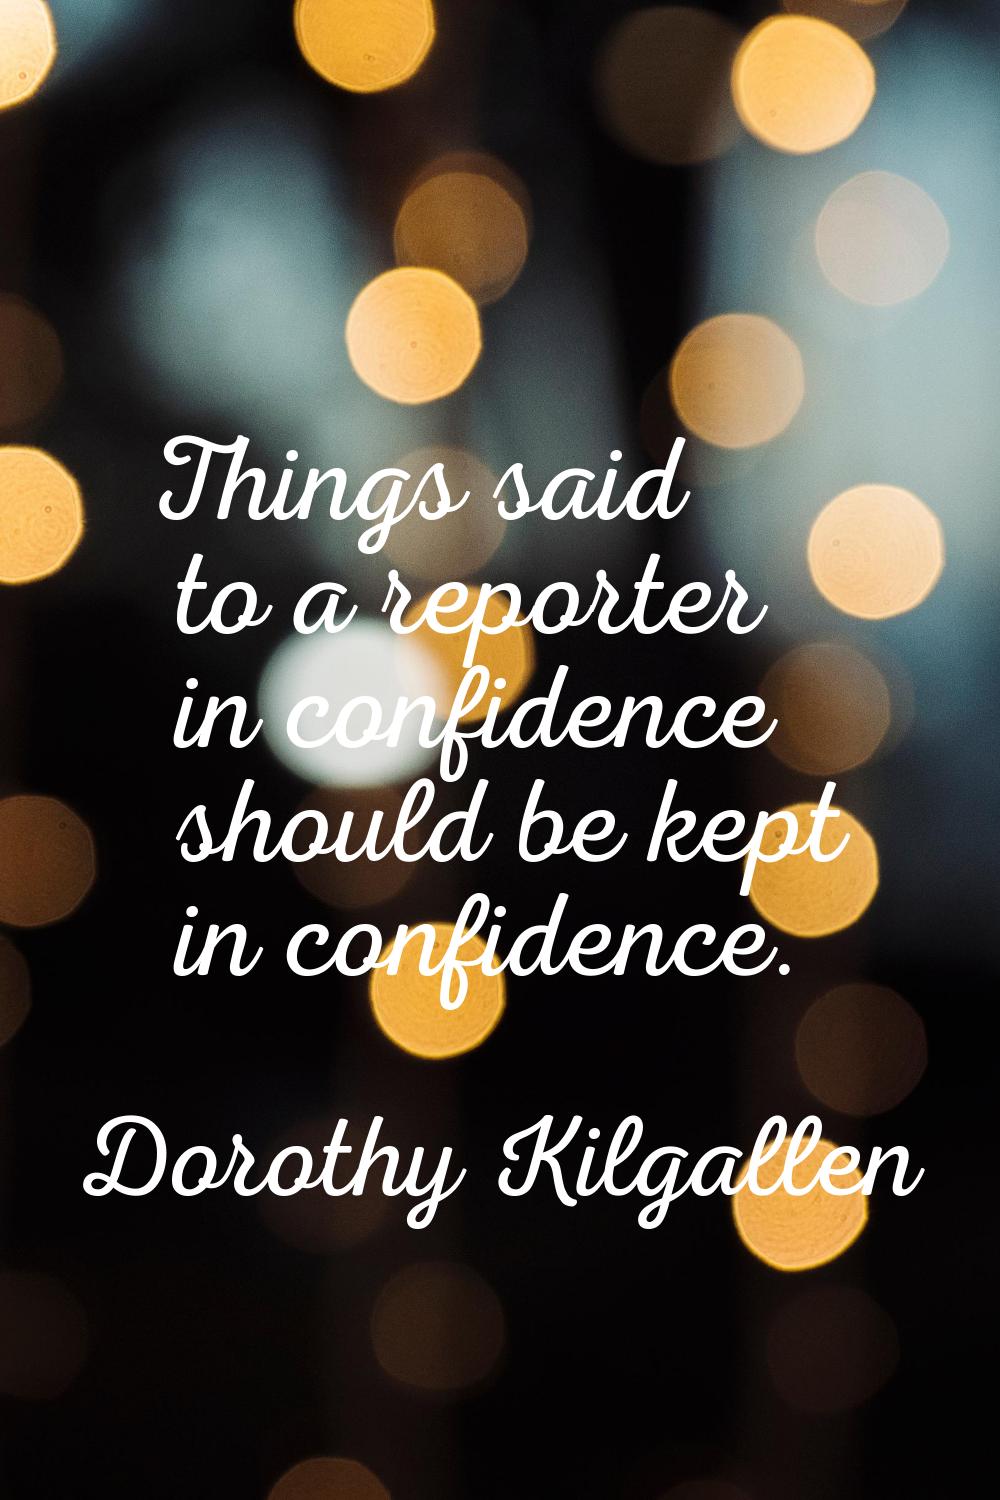 Things said to a reporter in confidence should be kept in confidence.